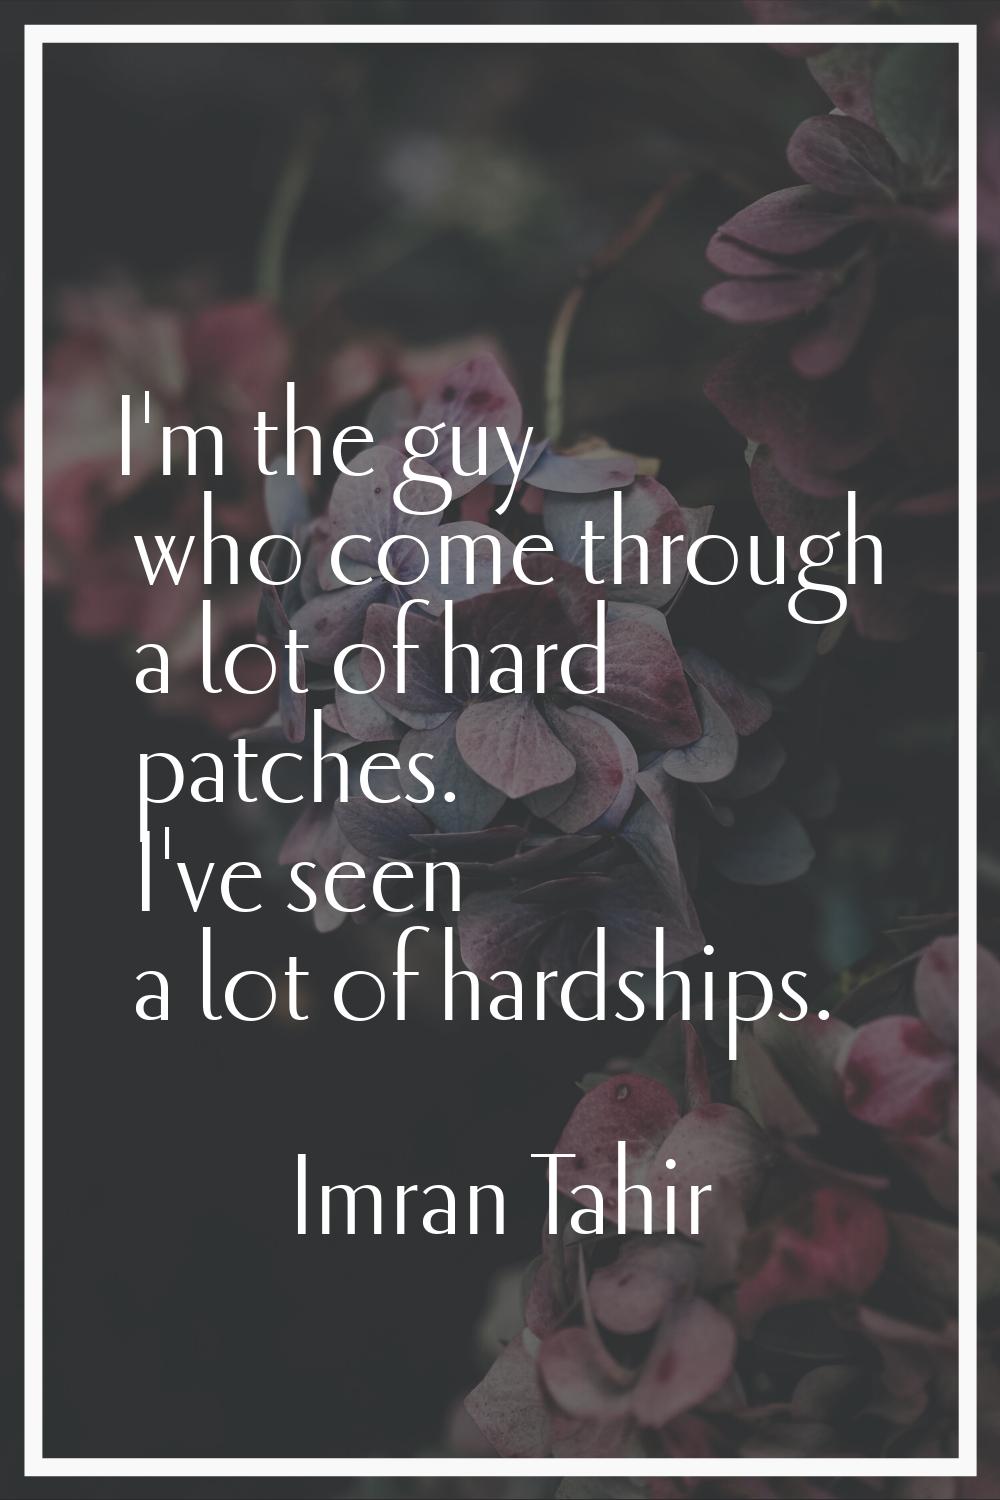 I'm the guy who come through a lot of hard patches. I've seen a lot of hardships.